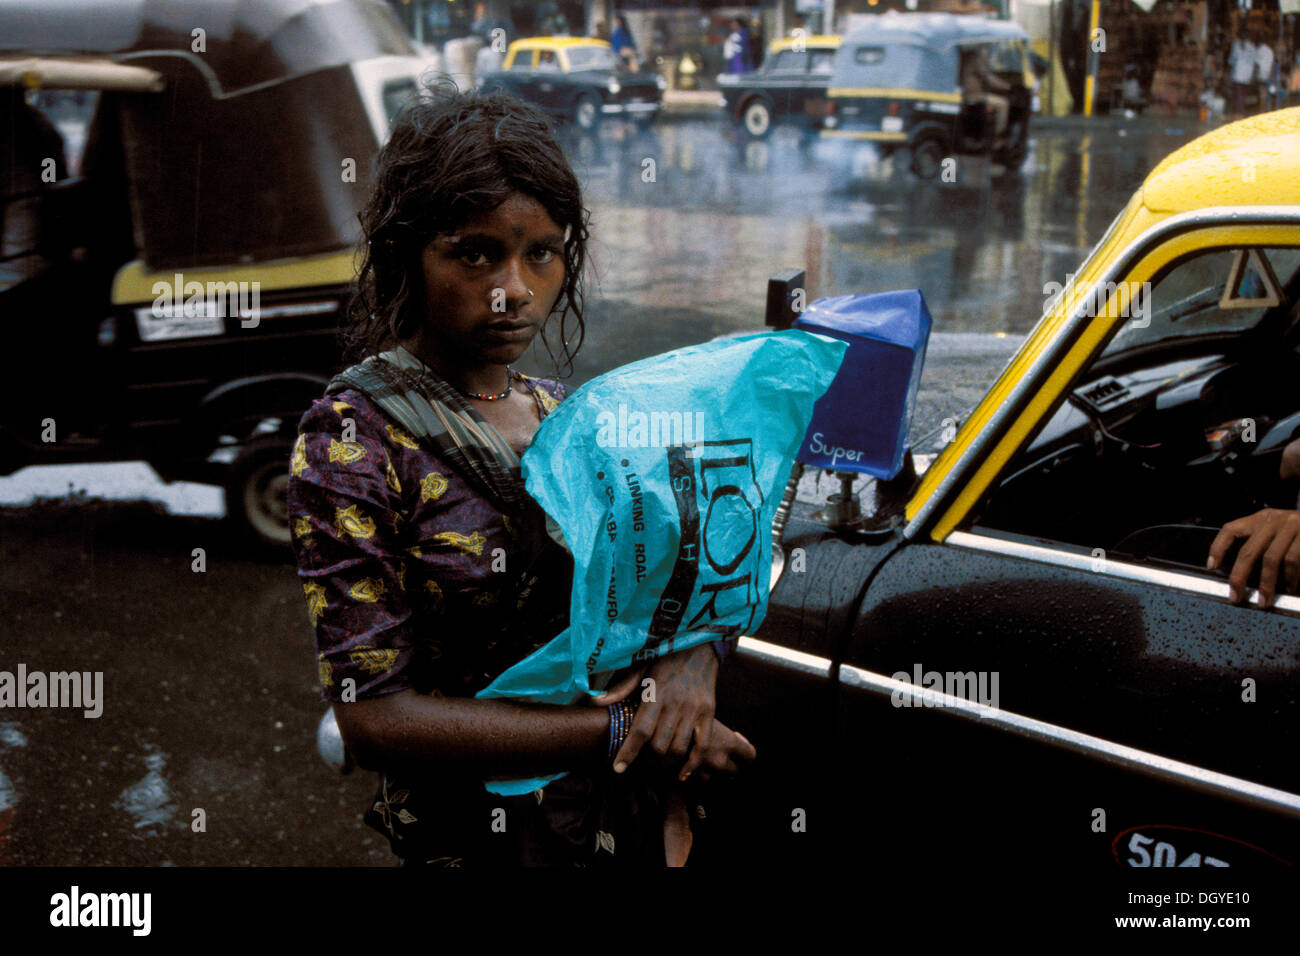 Female beggar standing in front of a taxi in the rain, monsoon, Mumbai or Bombay, Maharashtra, India, South Asia, Asia Stock Photo